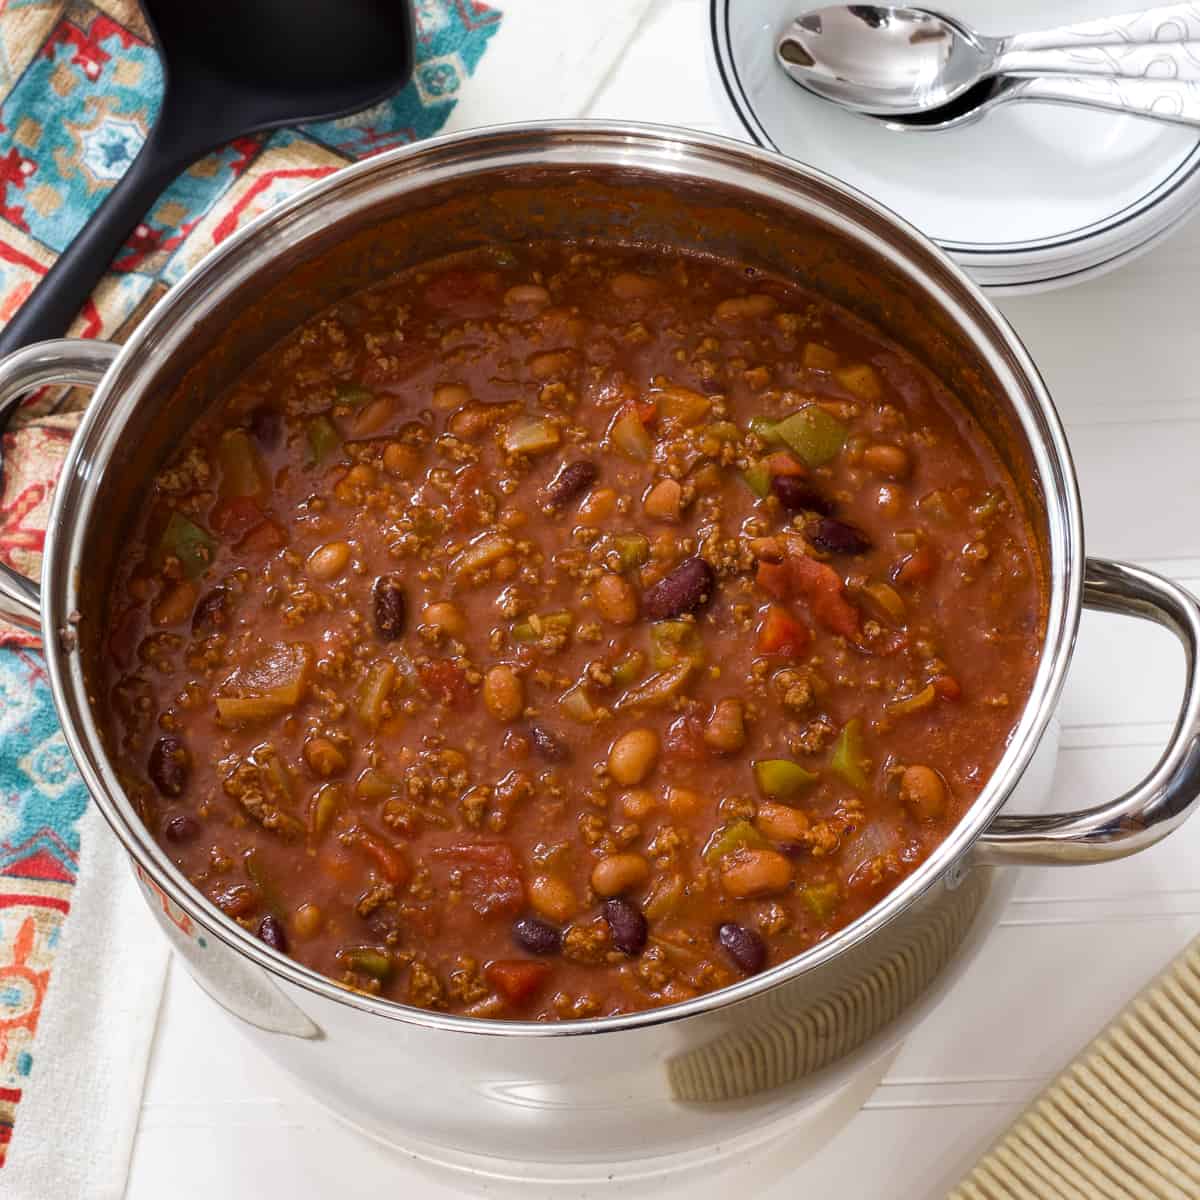 https://www.mindyscookingobsession.com/wp-content/uploads/2022/11/Easy-One-Pot-Chili-with-Beans-1200.jpg